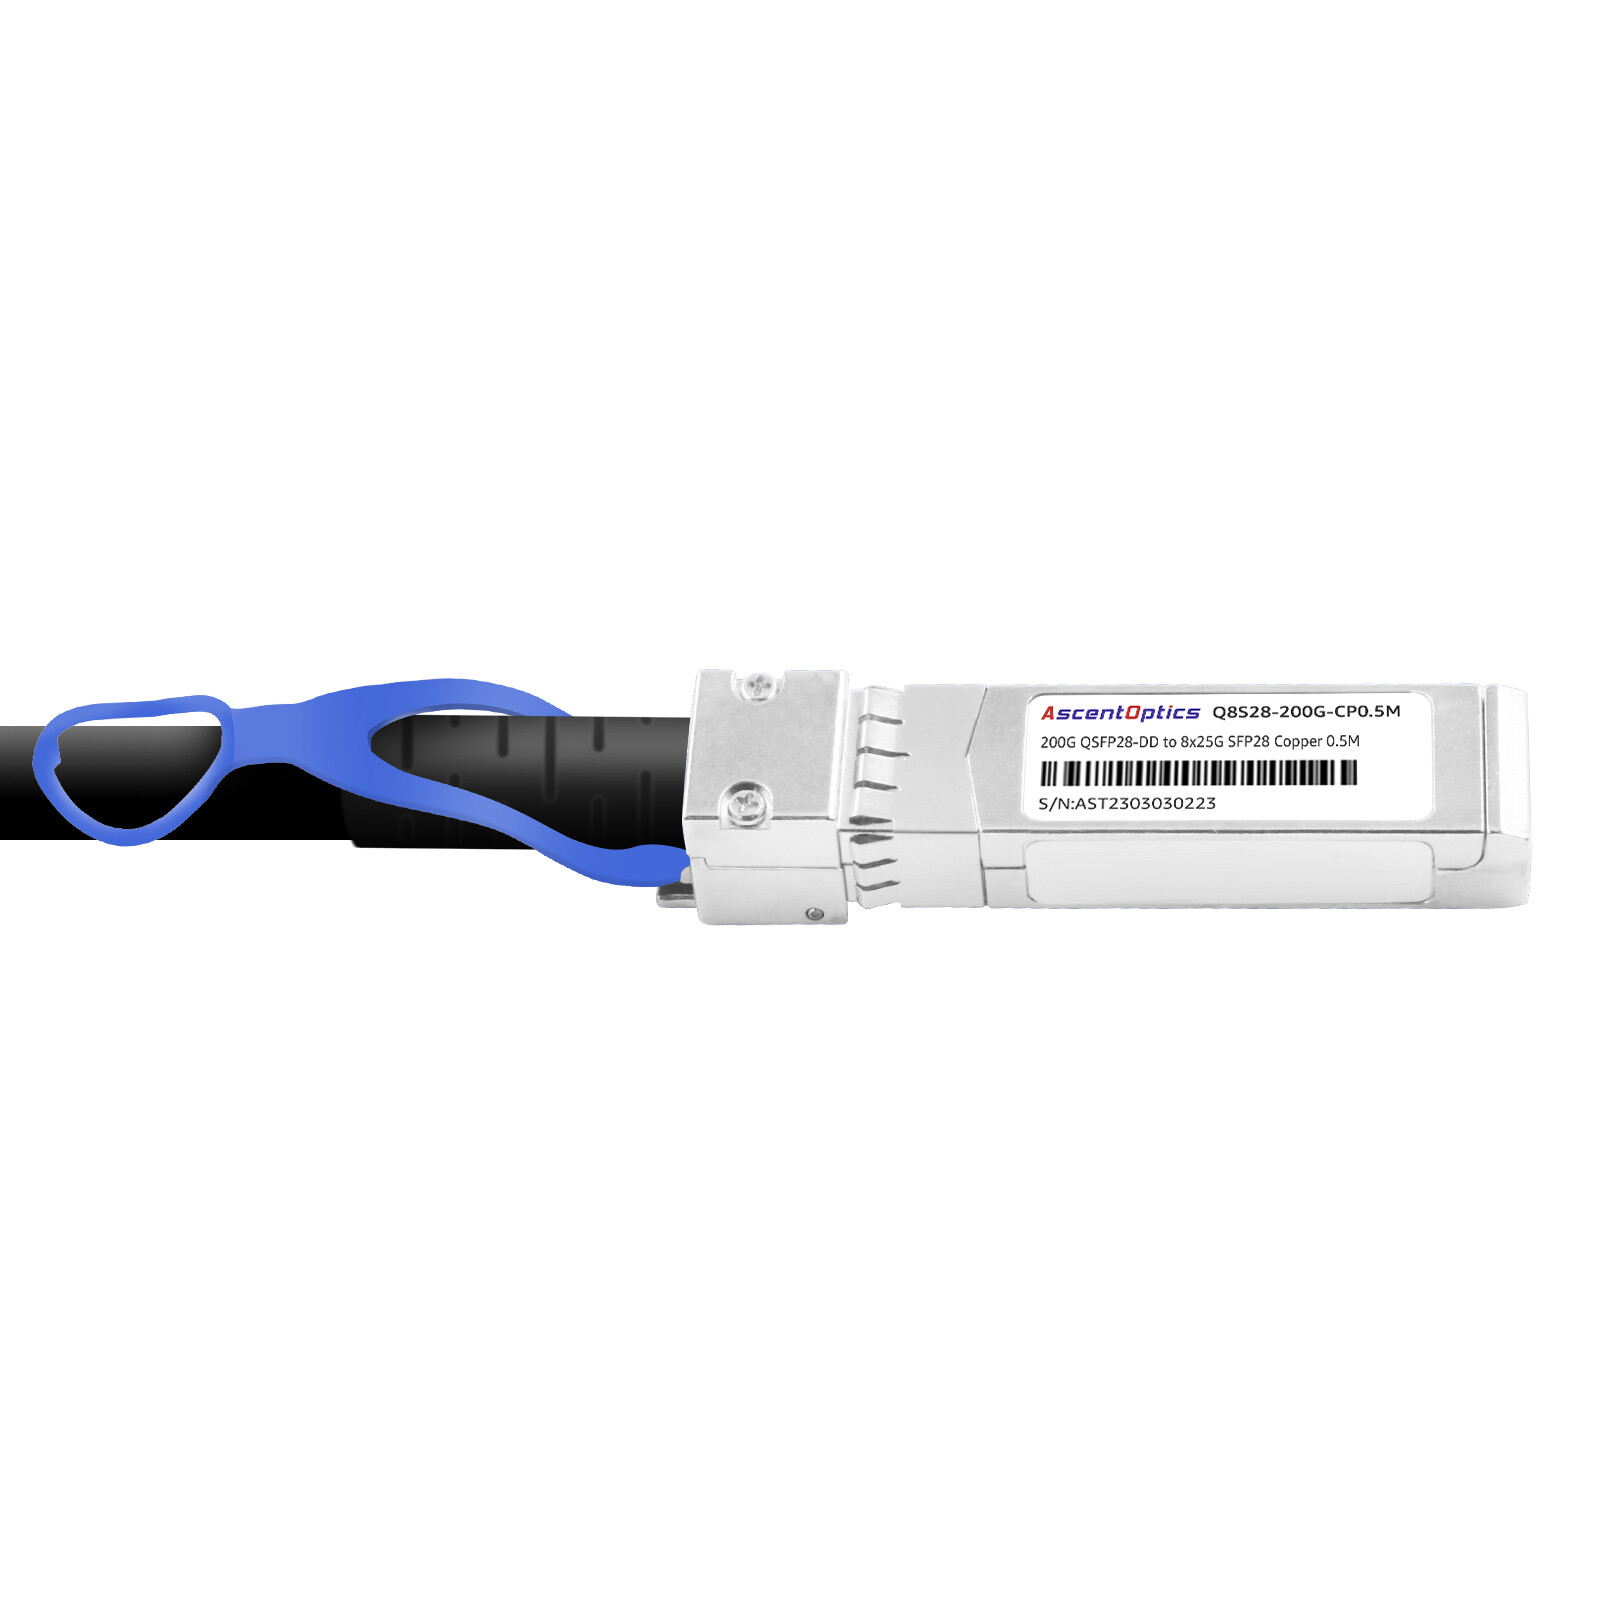 200G QSFP28-DD to 8x 25G SFP28 Copper Breakout Cable,0.5 Meter,Passive